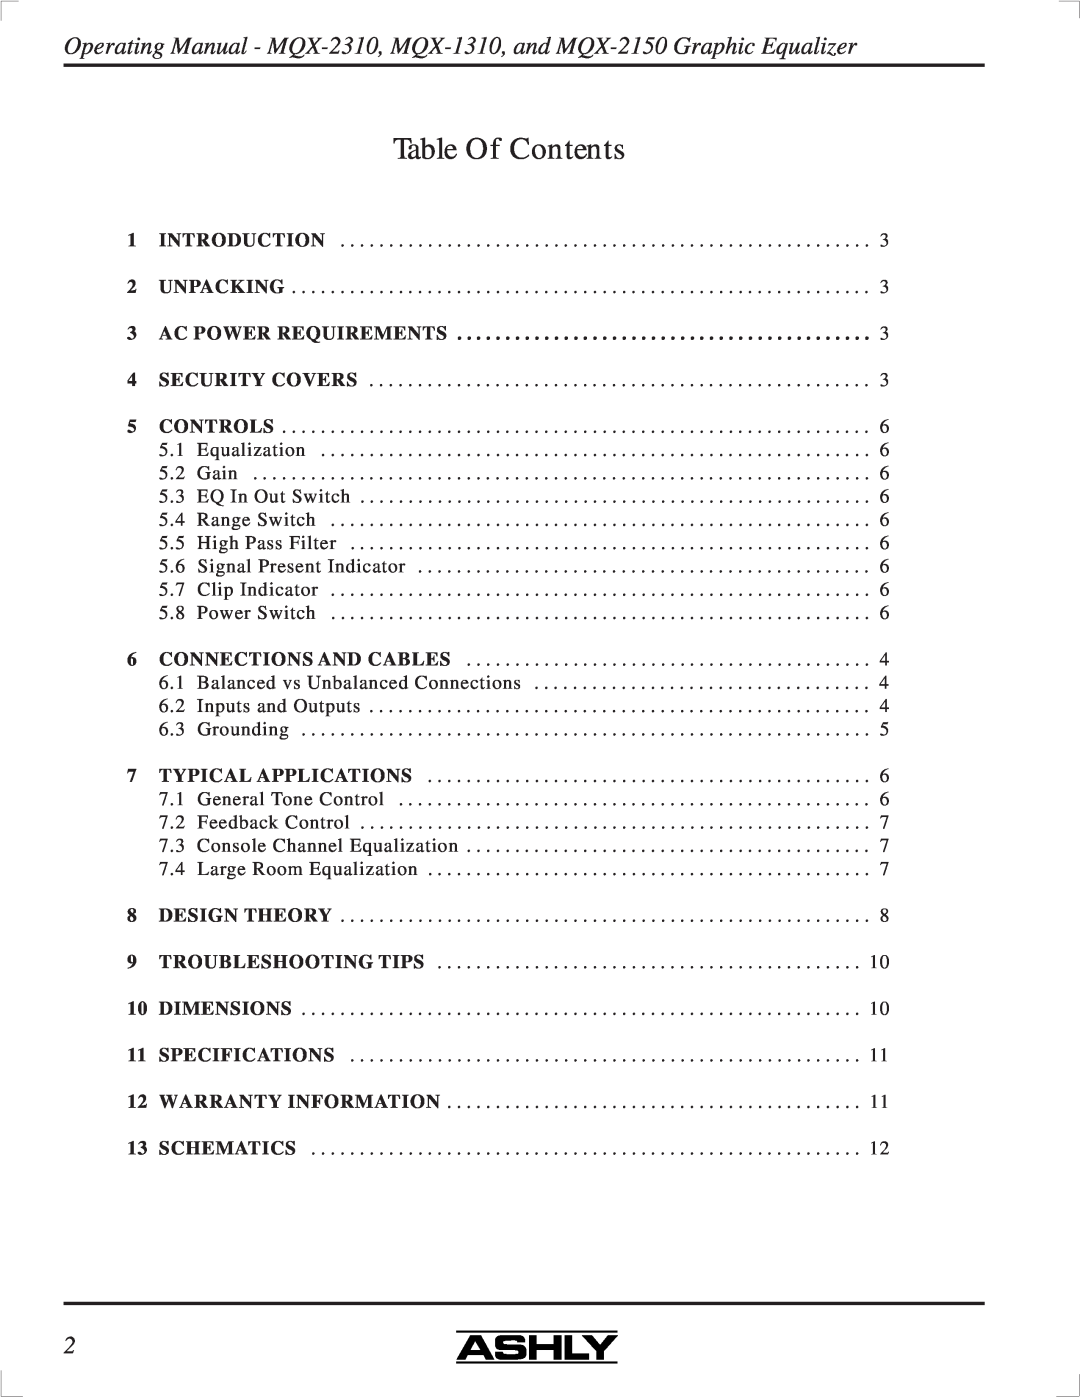 Ashly MQX-2310 manual Table Of Contents 